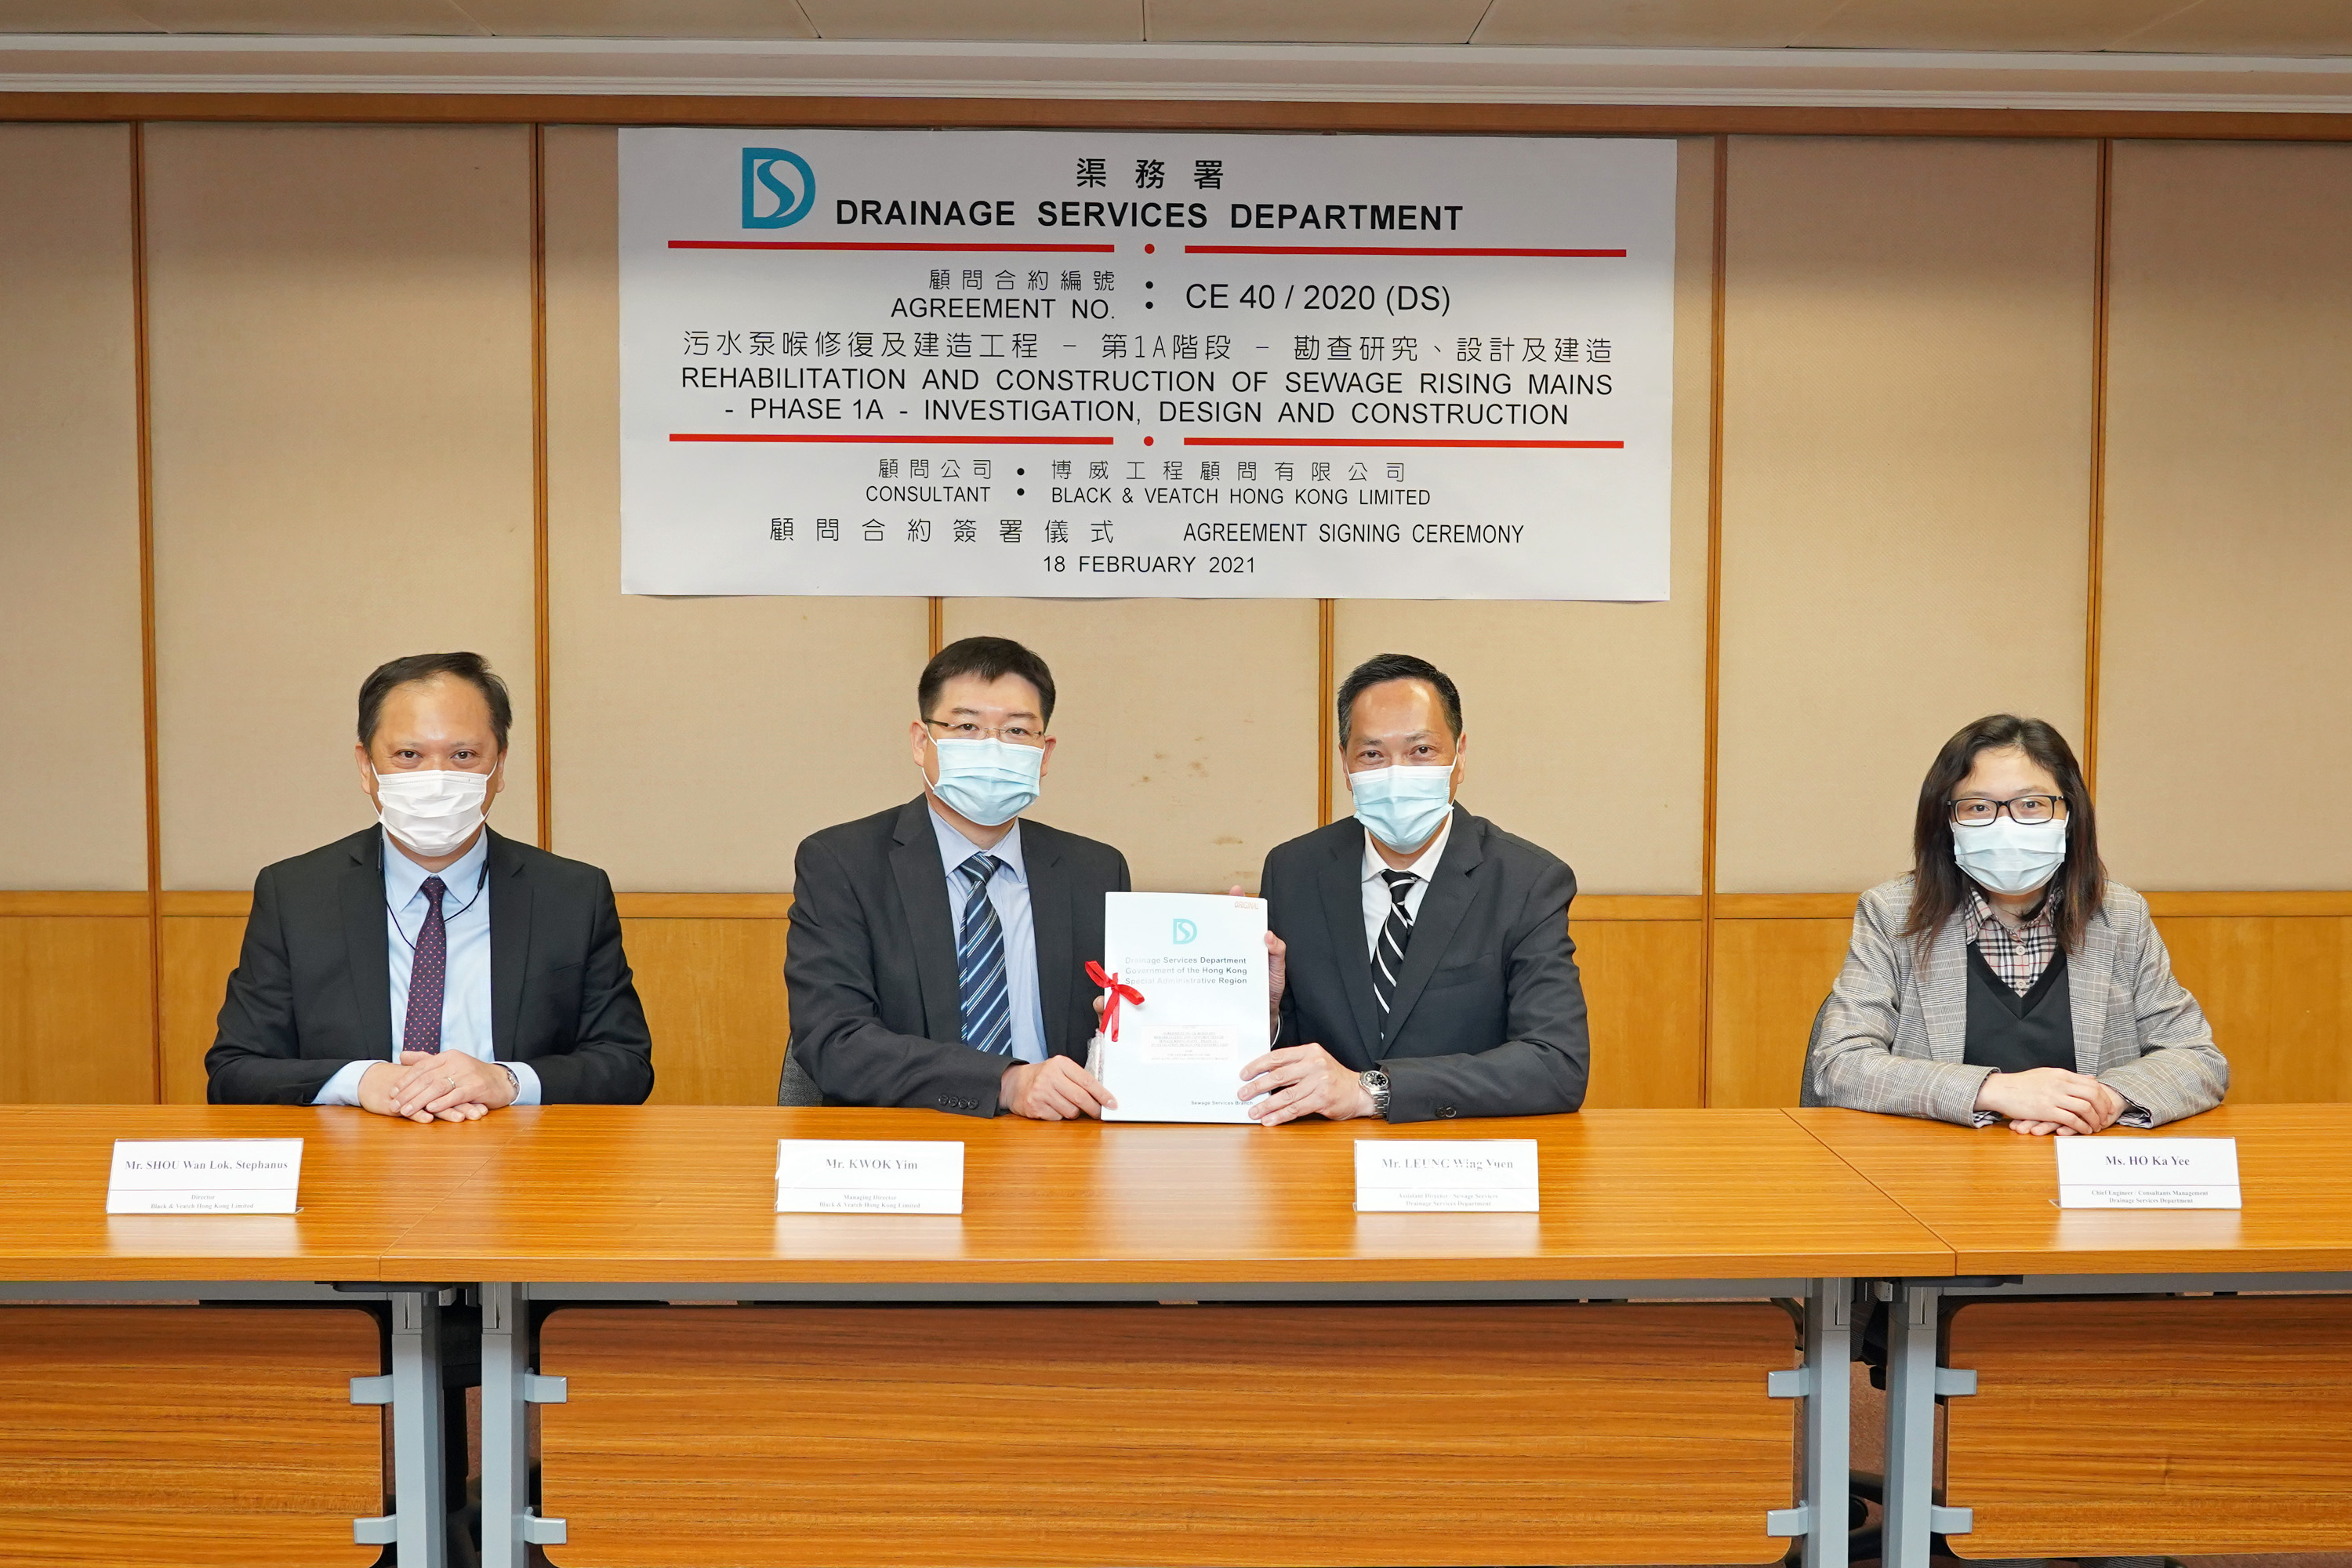 The Assistant Director / Sewage Services of DSD, Mr. LEUNG Wing-yuen, Walter (second right) and the Managing Director of Black & Veatch Hong Kong Limited, Mr. KWOK Yim (second left), attended the Agreement Signing Ceremony